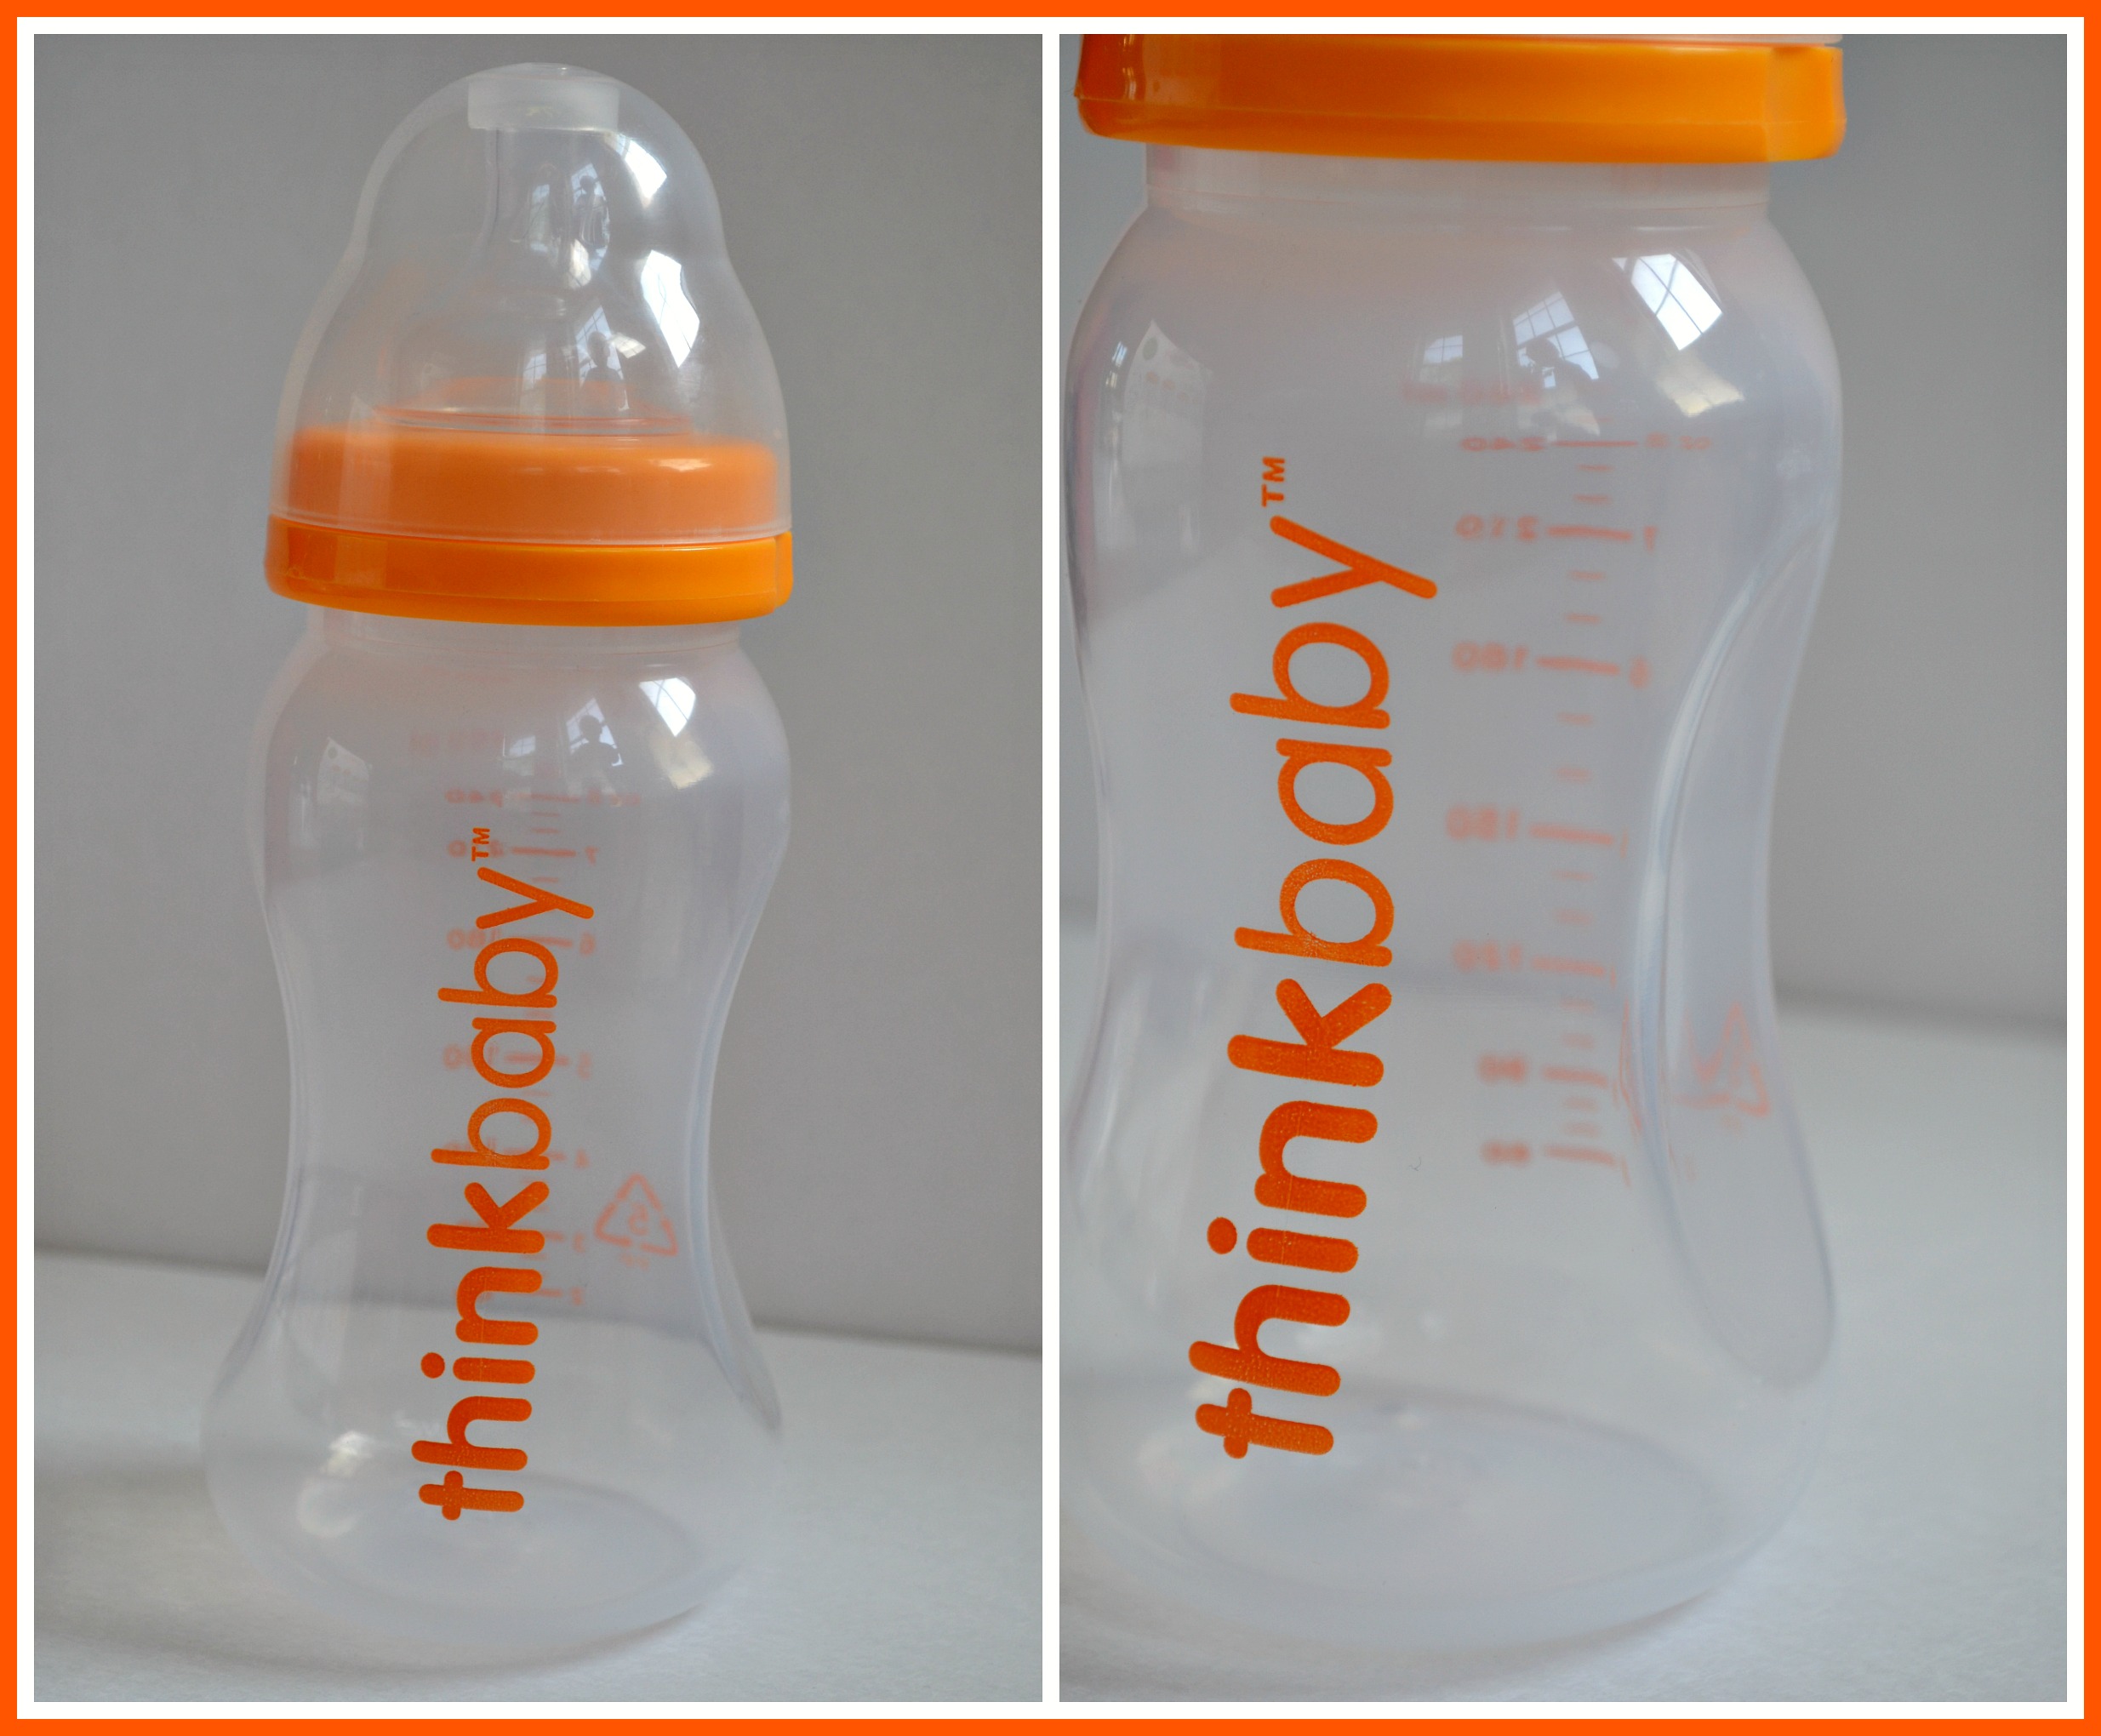 Thinkbaby bottle Starter Set Review (Getting Ready For Baby Gift Guide)